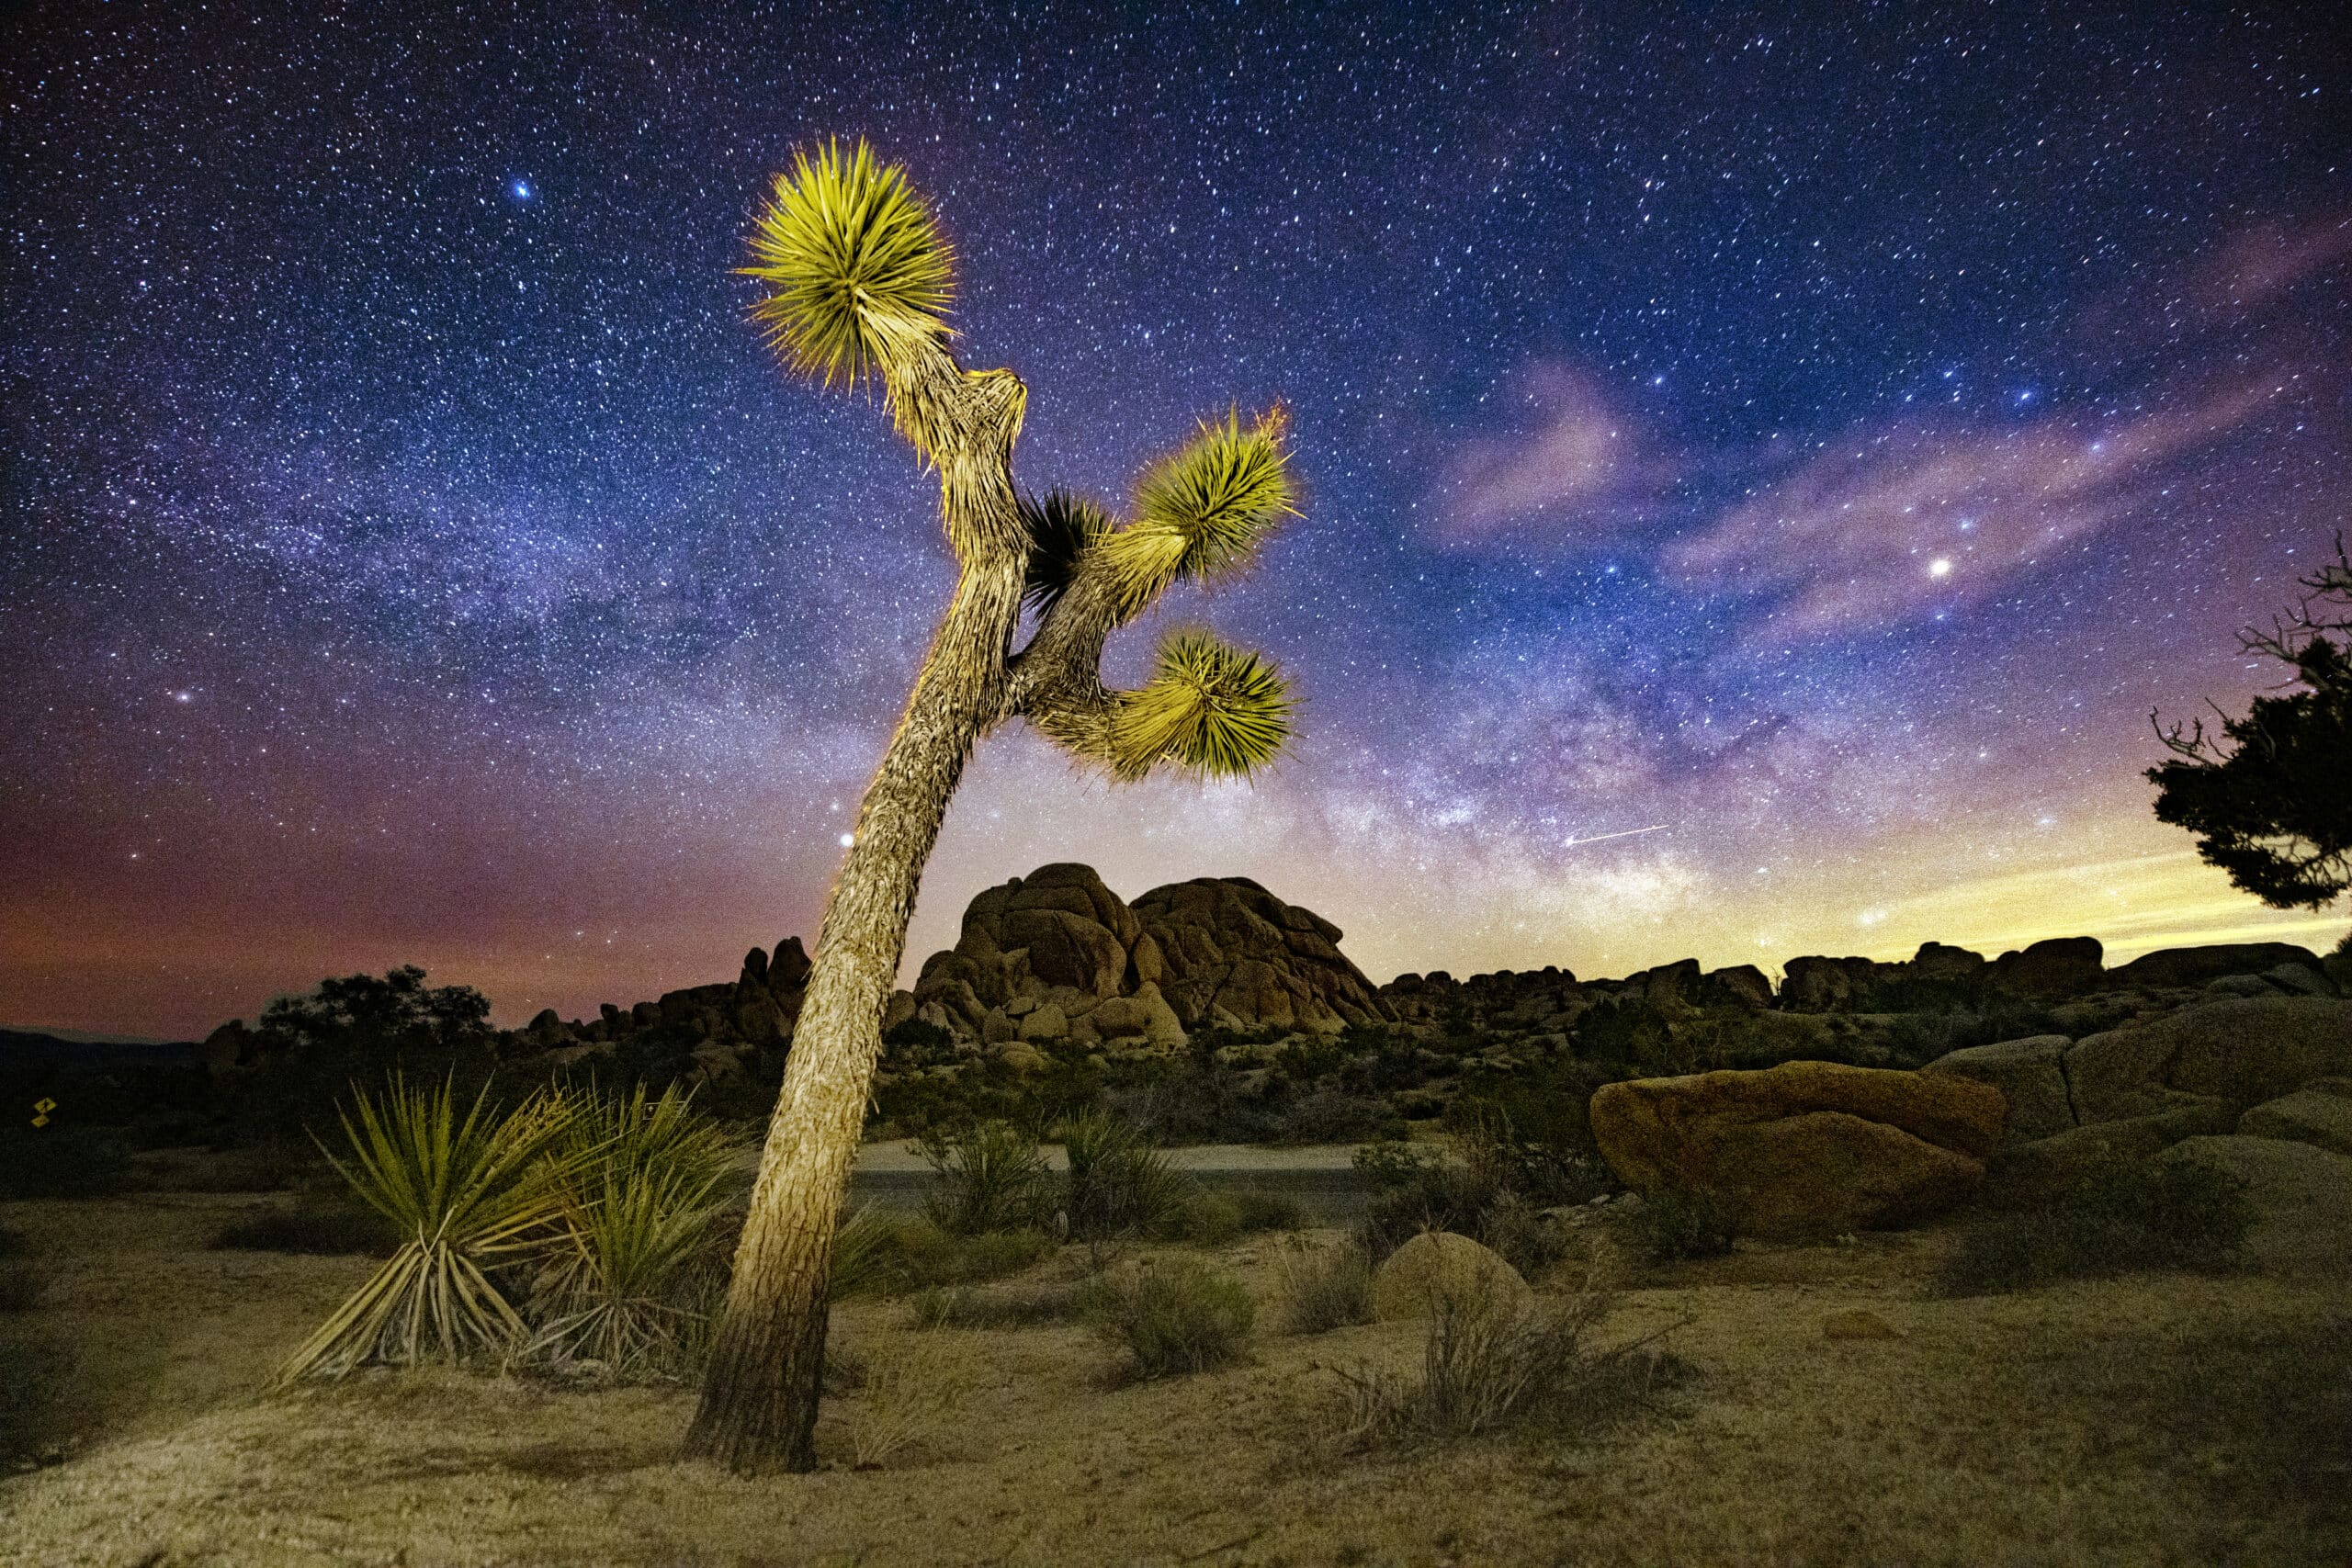 This is a long exposure at night with the Milky Way in the background during spring time in Joshua Tree National Park in California